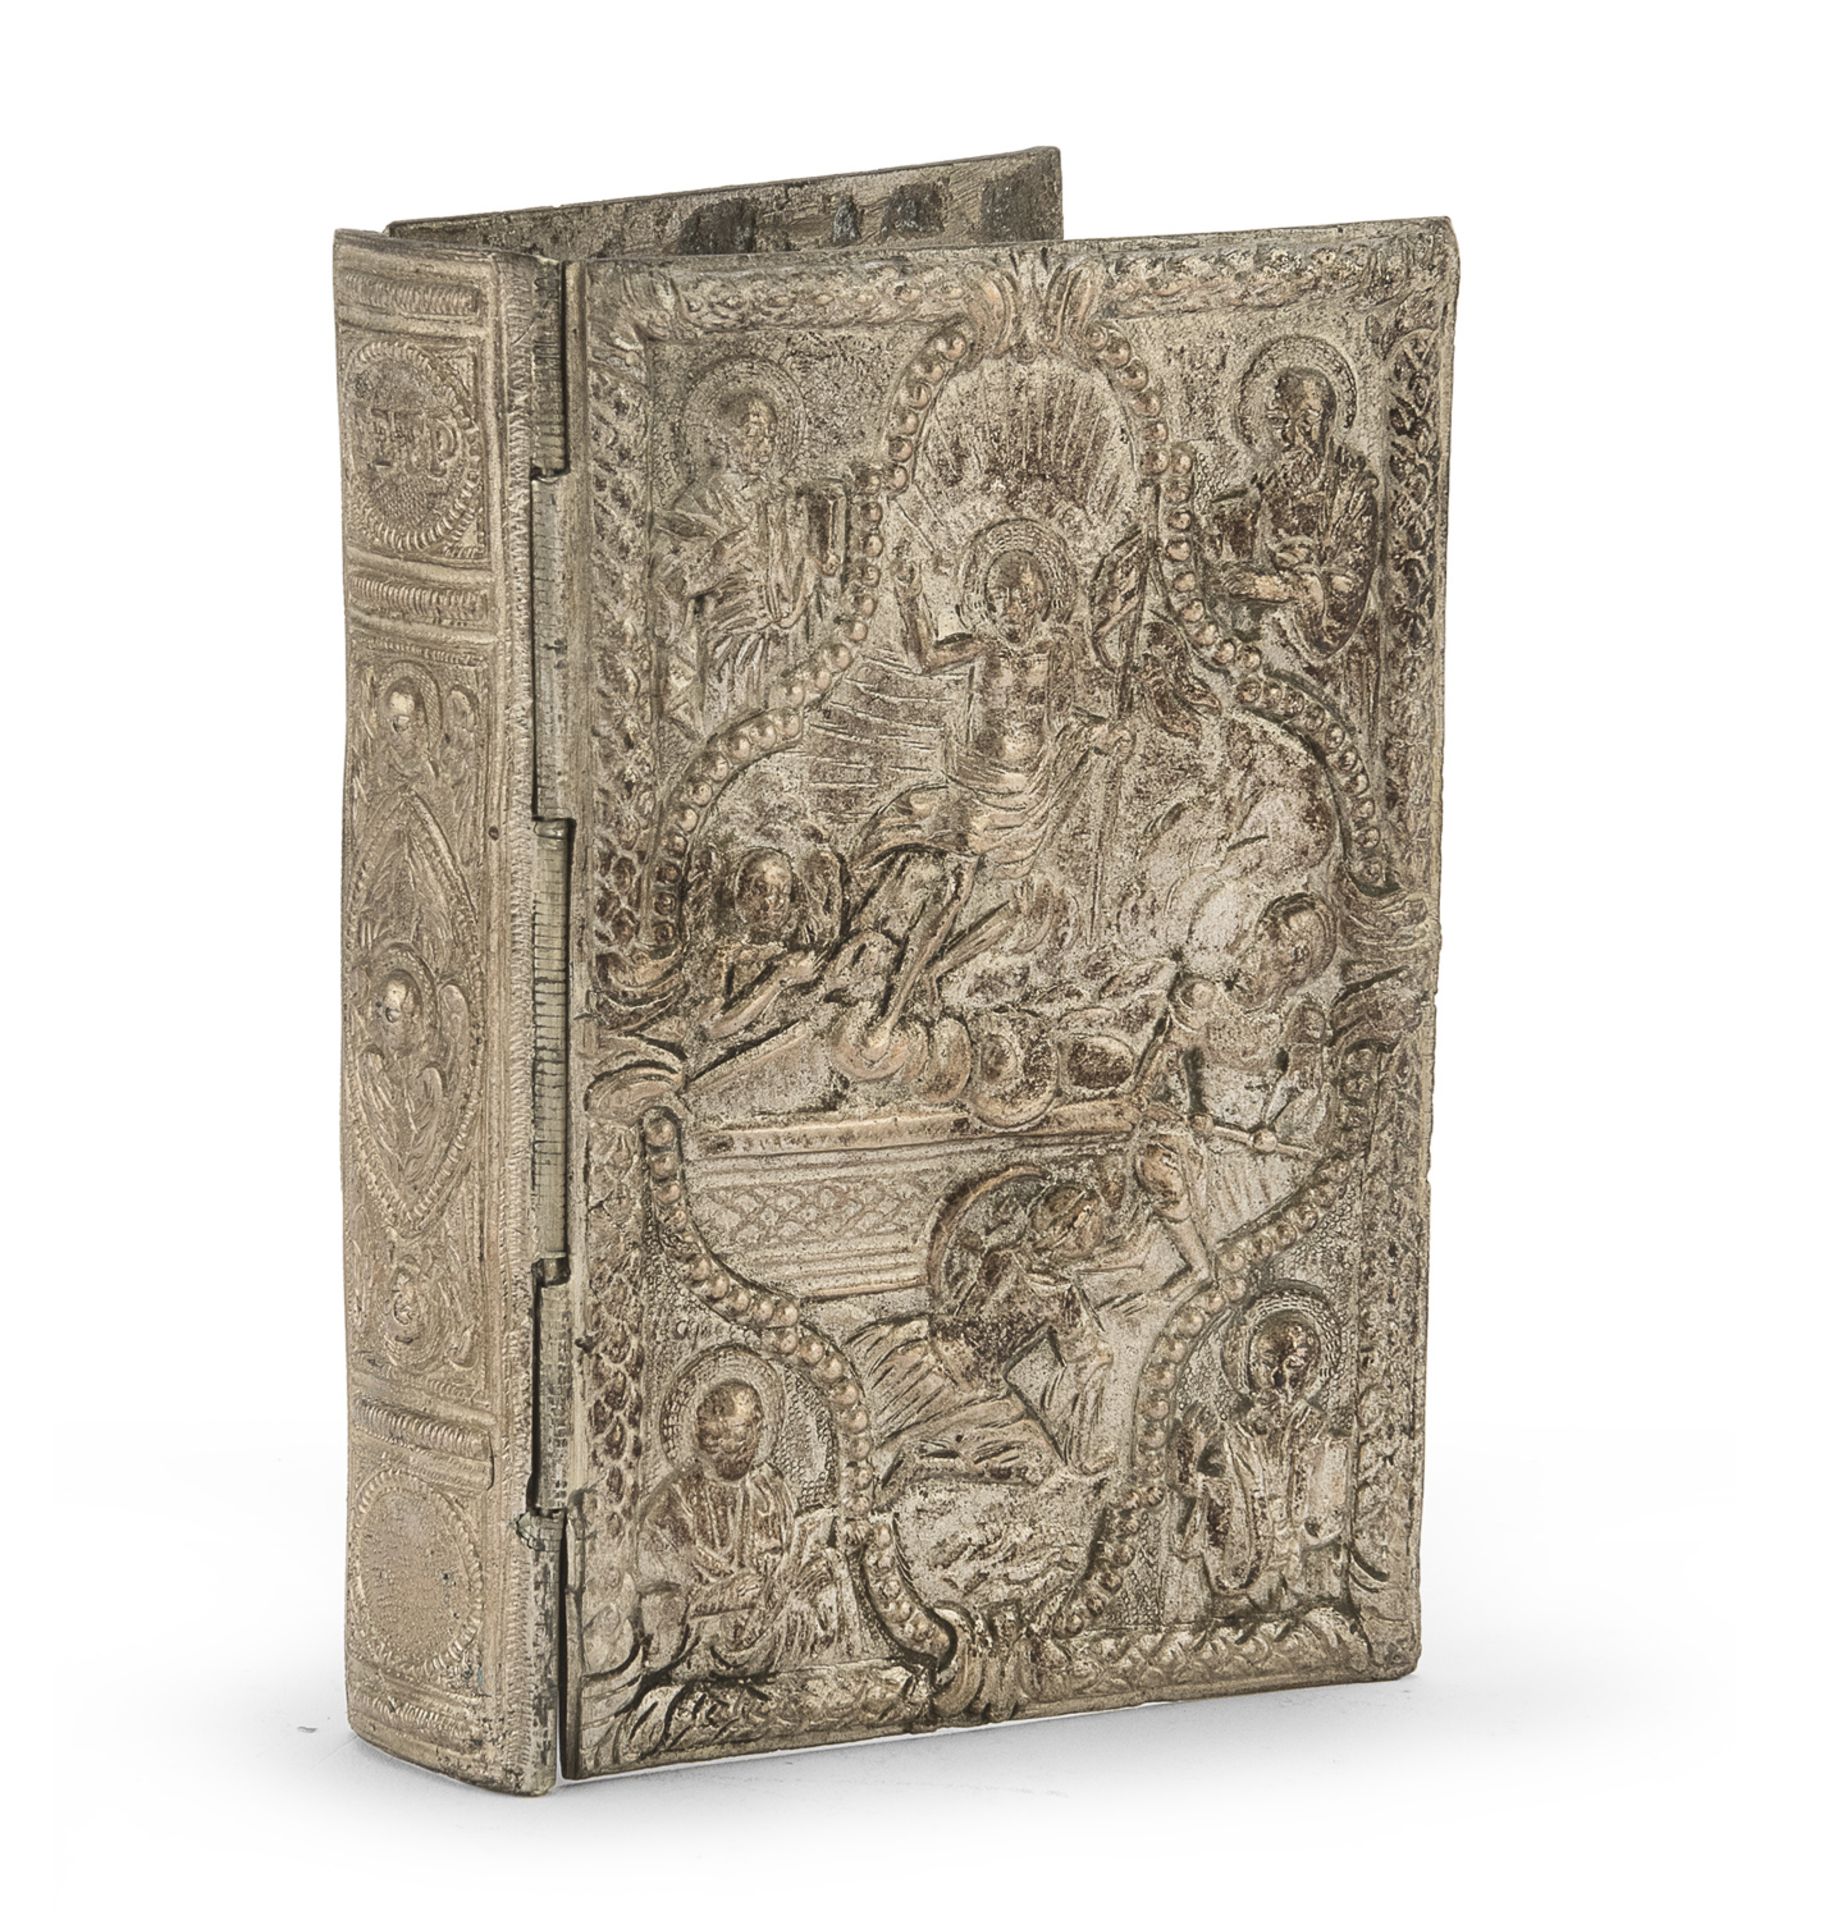 SILVER BRONZE BINDING GREECE OR BALKANS LATE 19TH CENTURY - Image 2 of 2